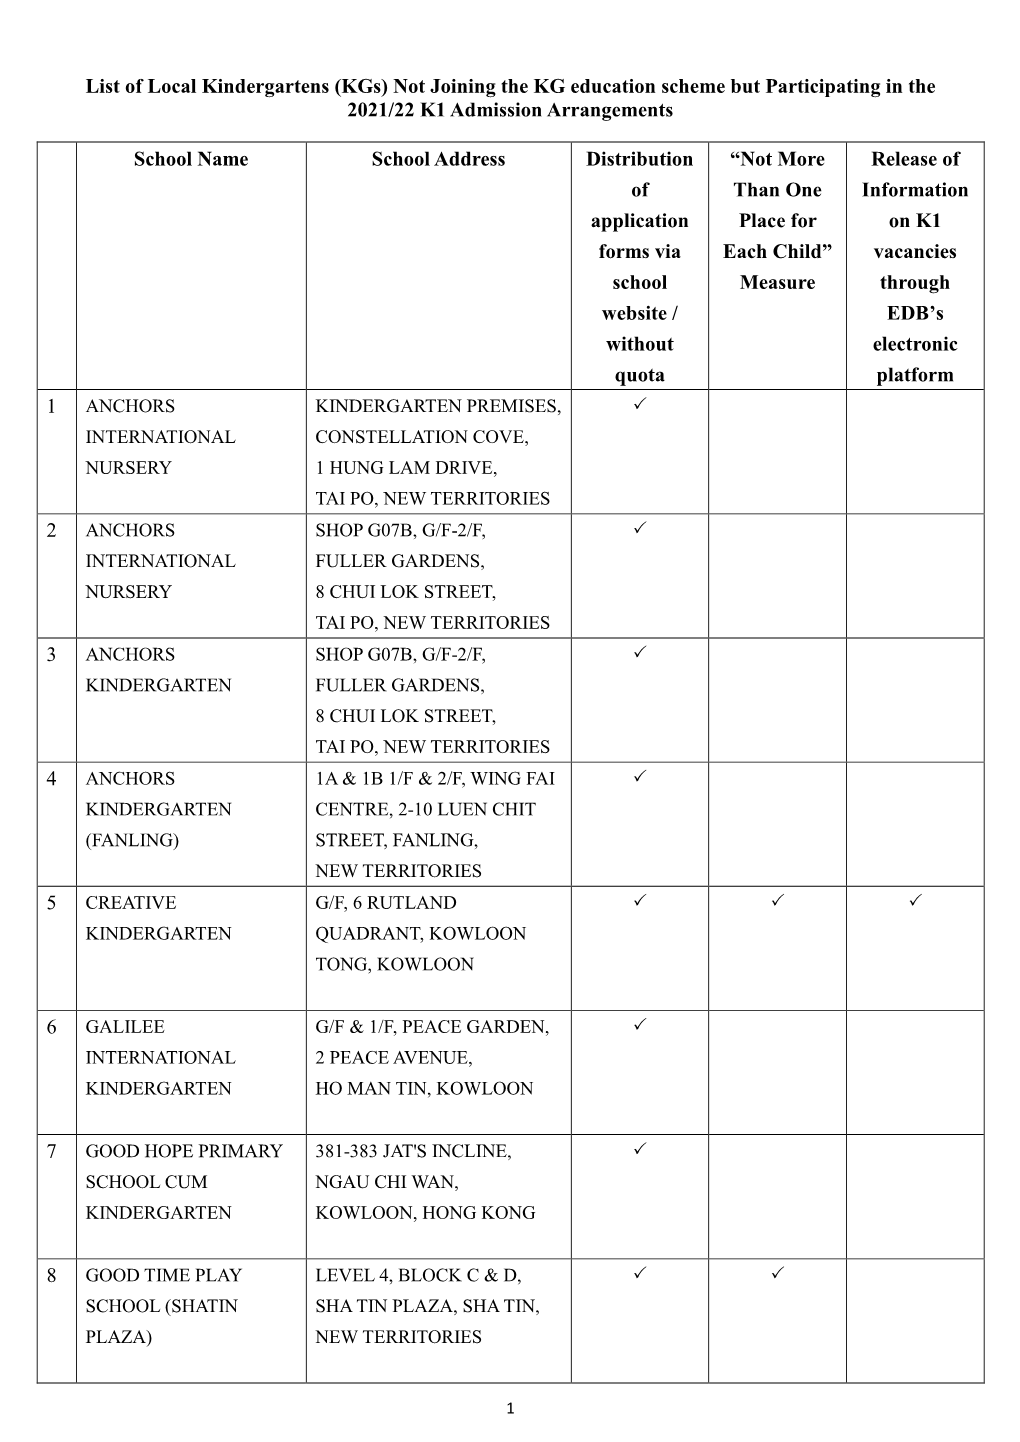 List of Local Kindergartens (Kgs) Not Joining the KG Education Scheme but Participating in the 2021/22 K1 Admission Arrangements